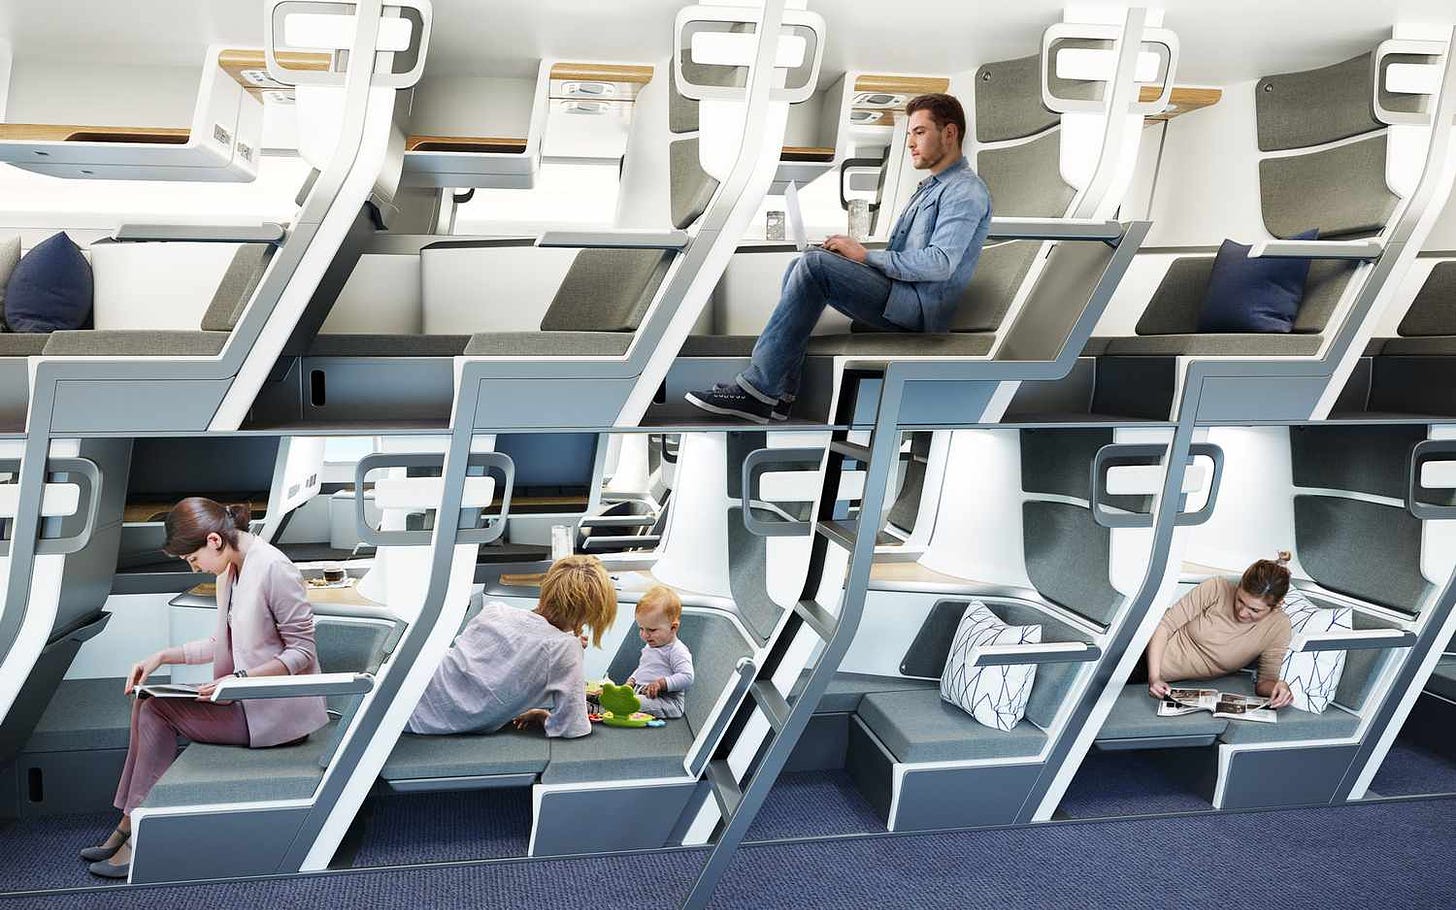 This Double-decker Airplane Design Could Allow Everyone to Have Lie-flat  Seats - Even in Economy | Travel + Leisure